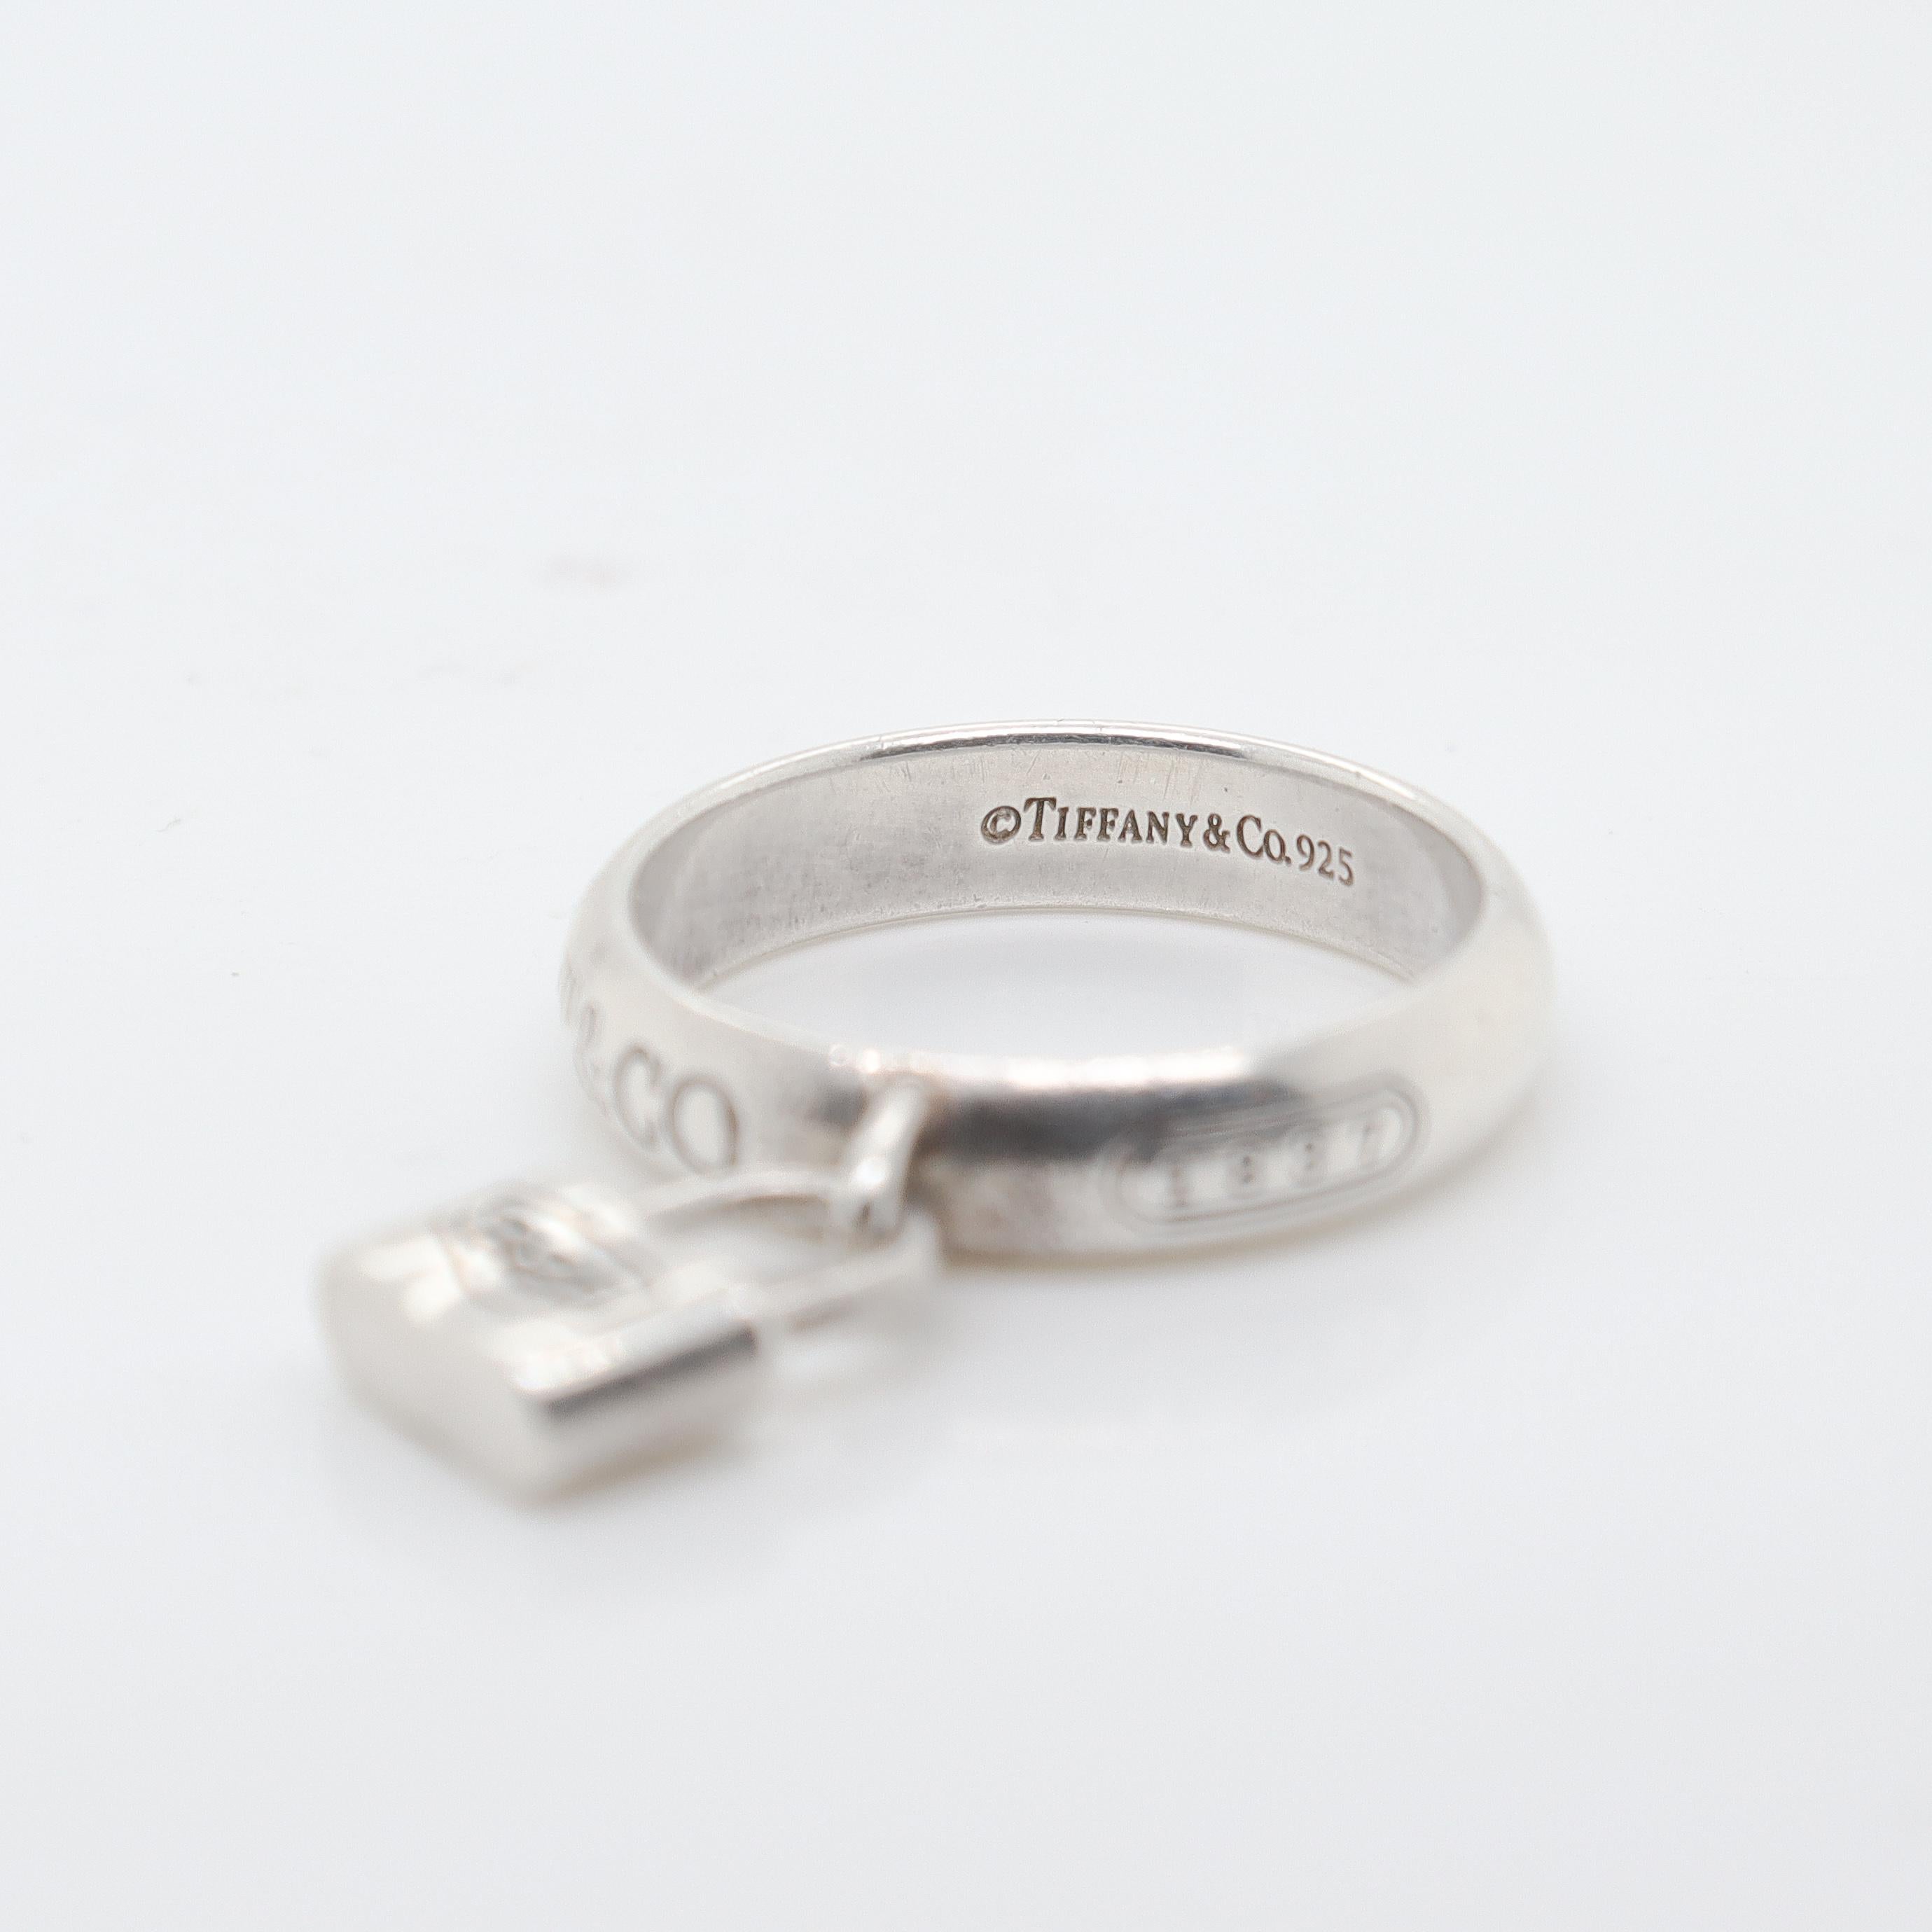 Women's Tiffany & Co Sterling Silver 1837 Lock Charm Band Ring